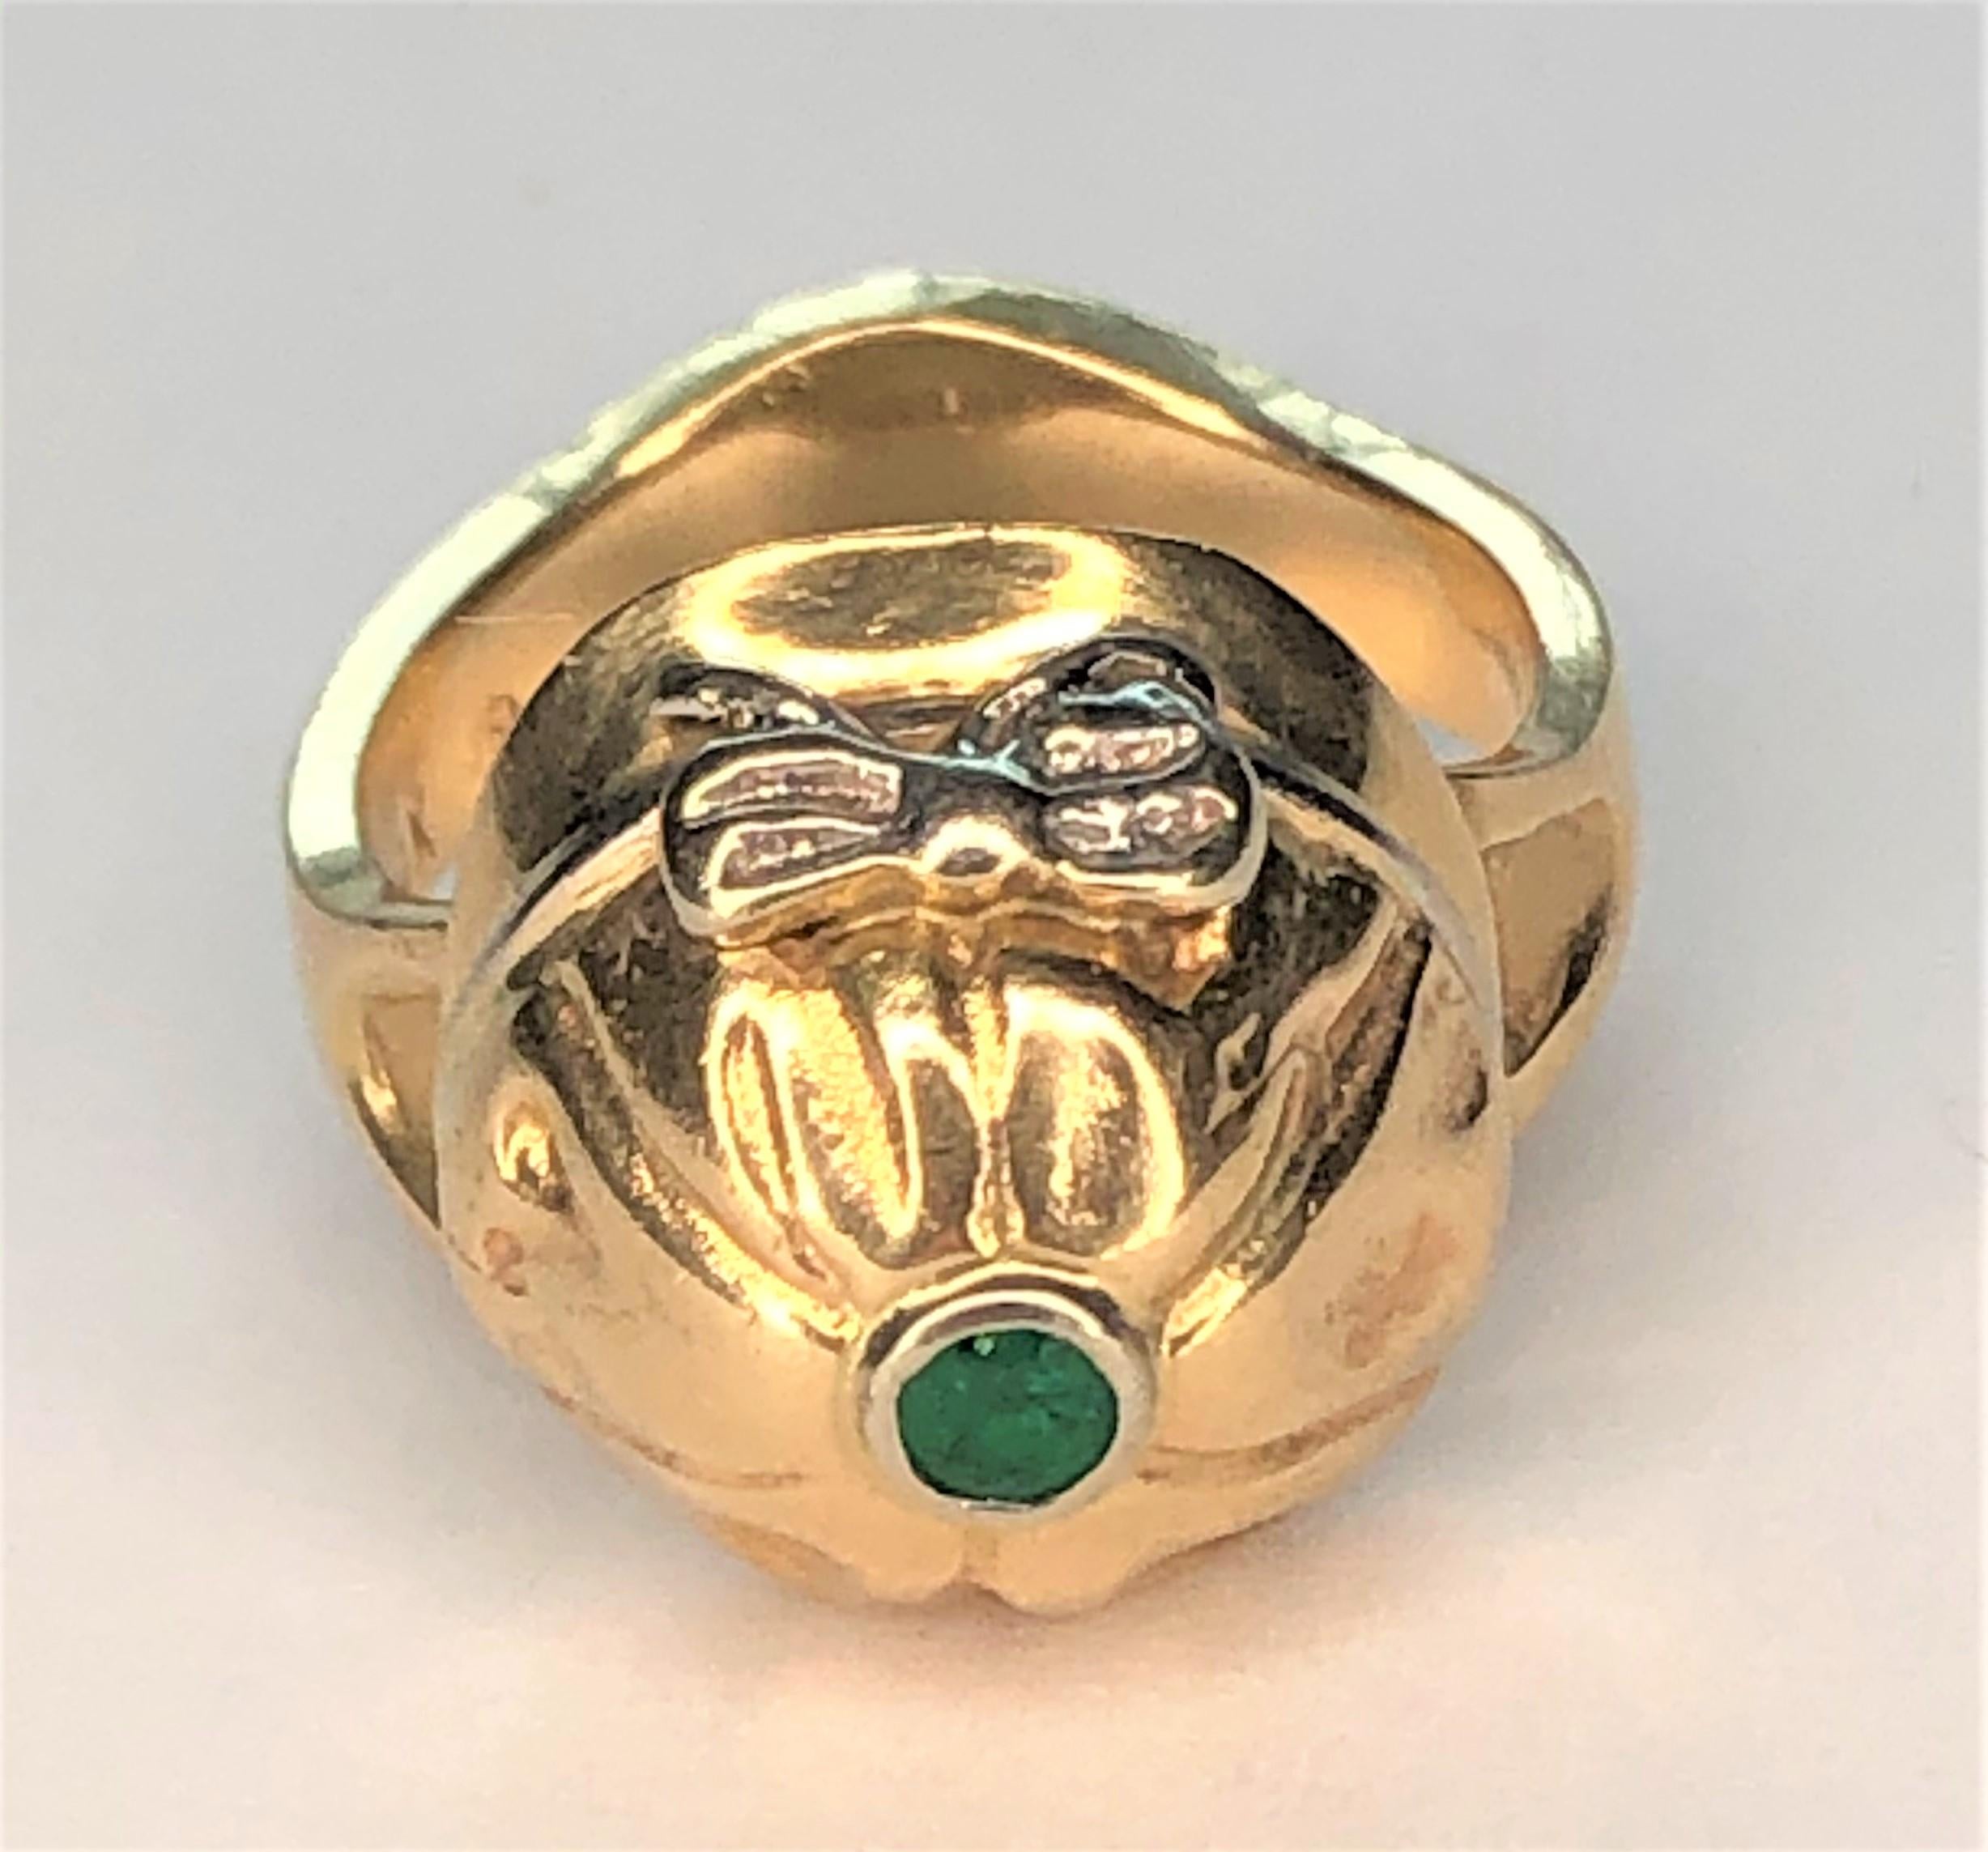 This adorable ring will be the perfect piece for anyone loving horses!
14 karat yellow gold 3mm band that increases to approximately 7mm at the bottom, an area that could be engraved. 
Small round emerald on top of hat.  Approximately 3mm round.